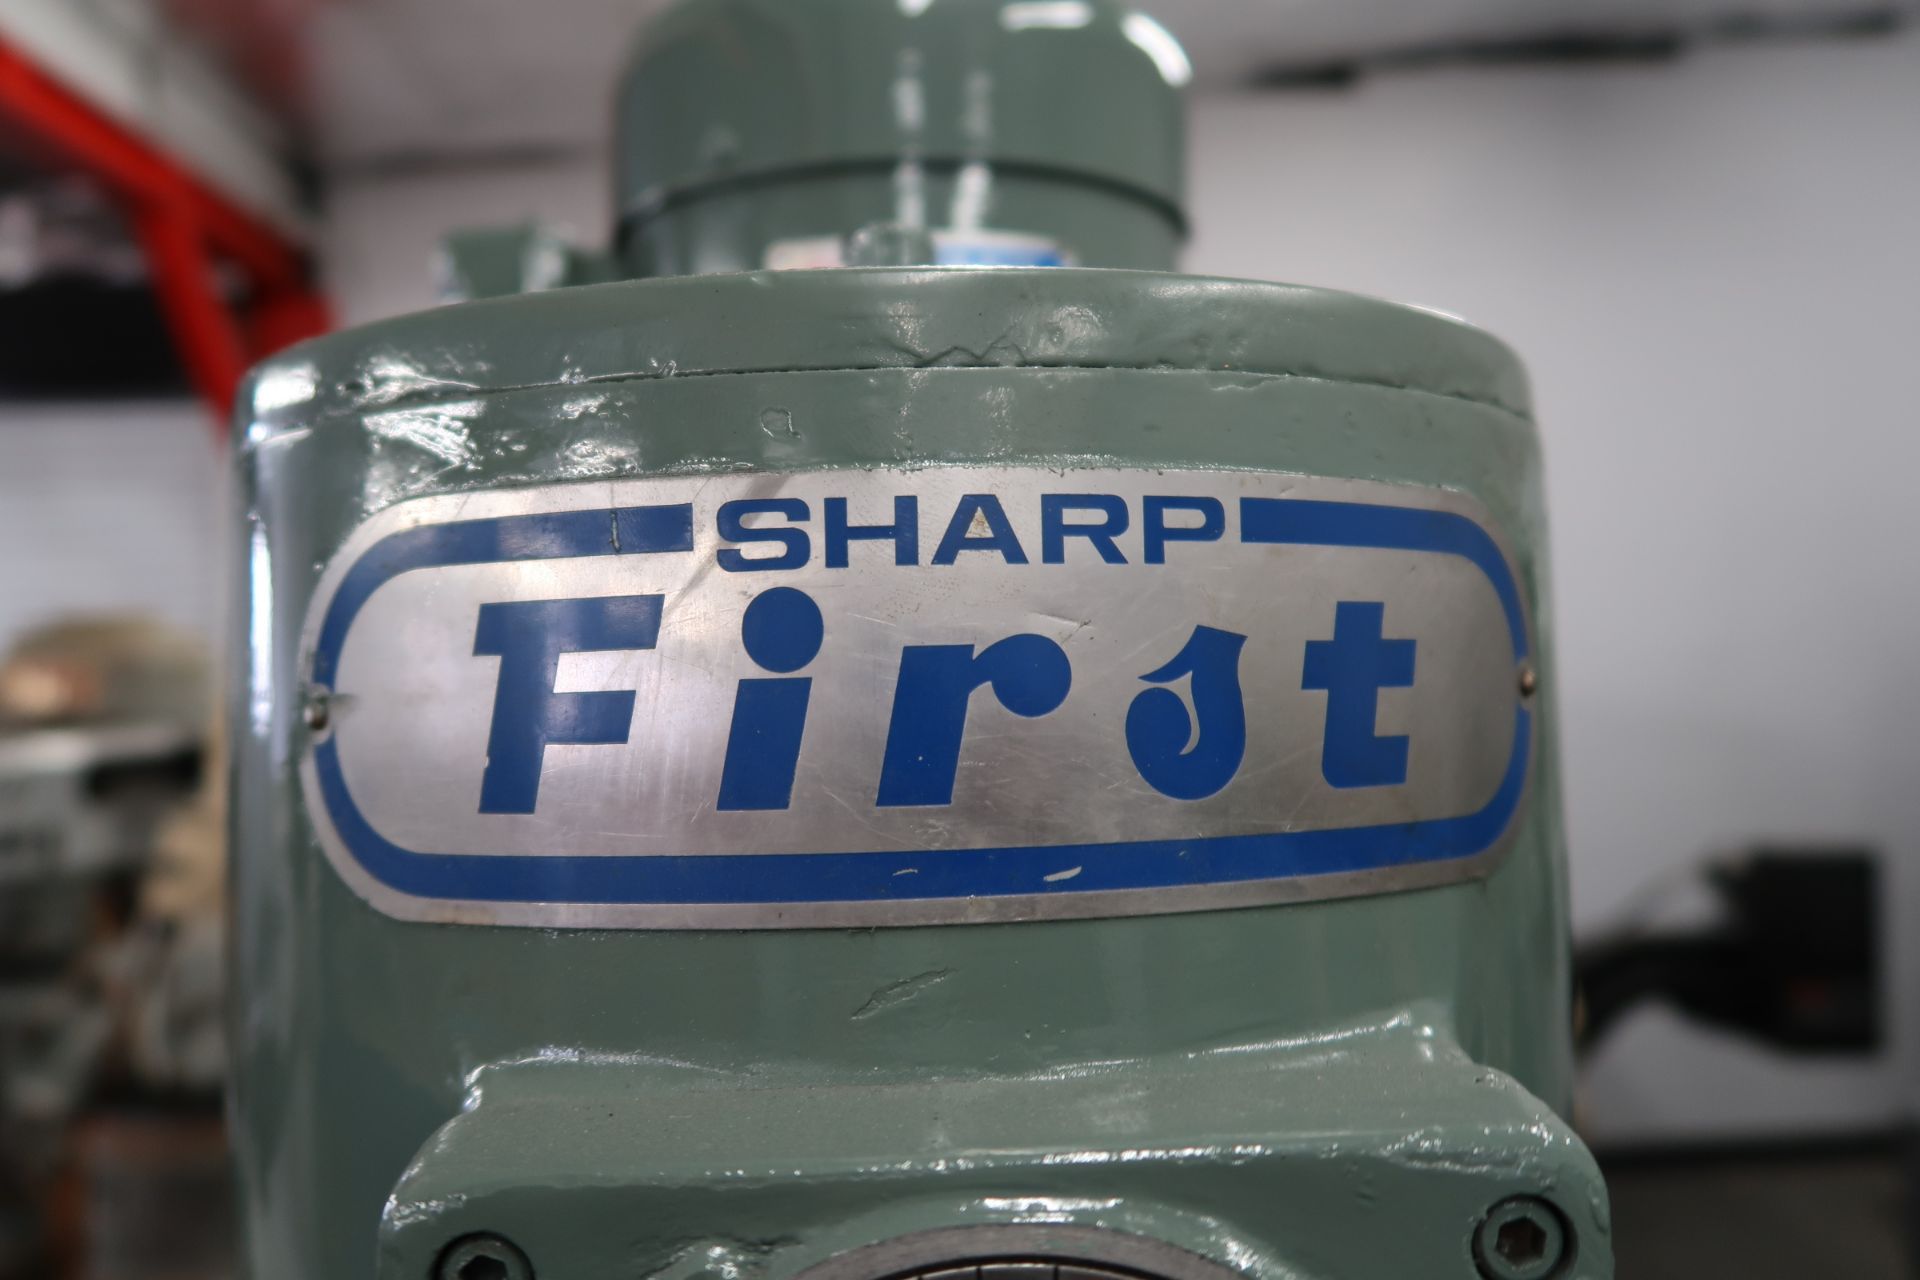 Sharp First Vertical Mill s/n 7191865 w/ DRO II-2ML Prog DRO, 3Hp Motor, 60-4500 rpm, SOLD AS IS - Image 7 of 7